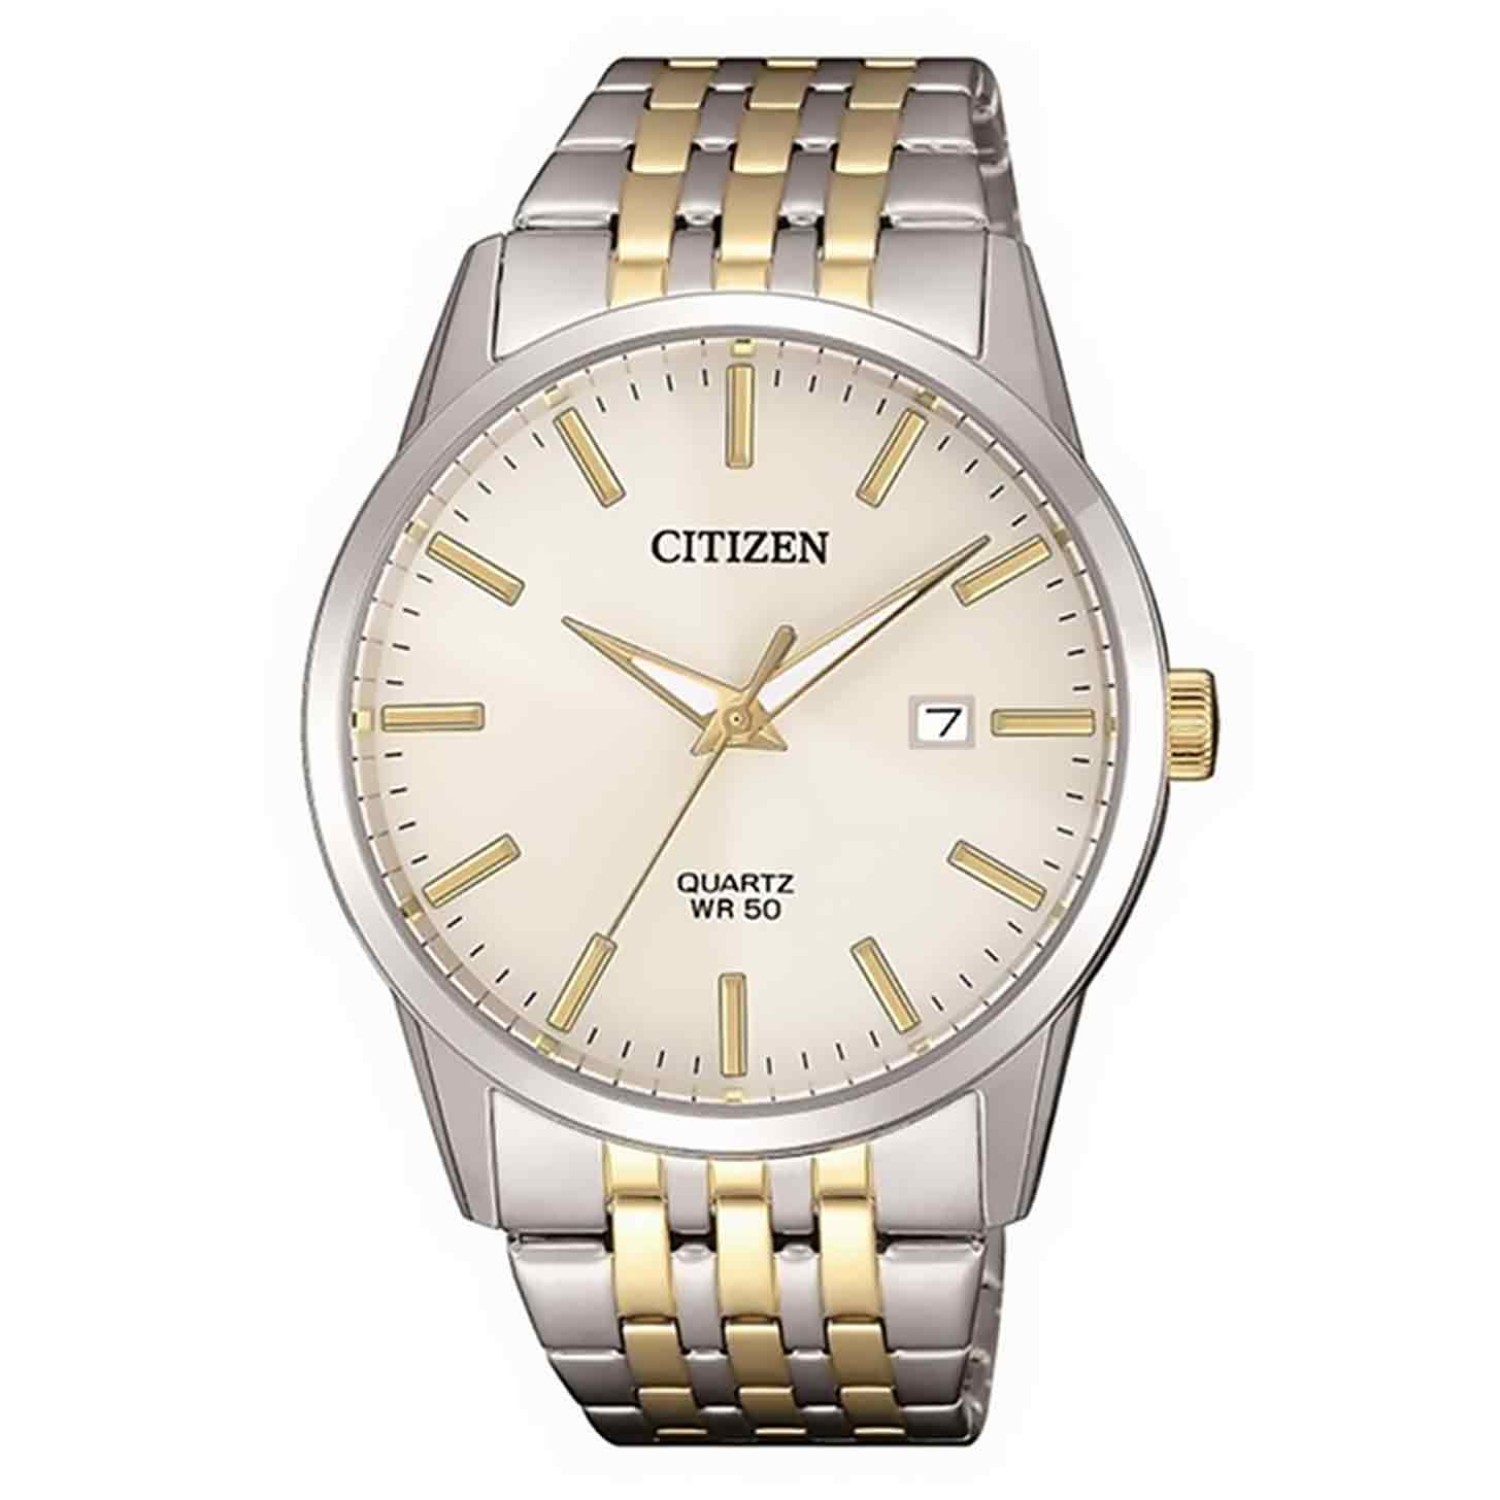 BI5006-81P Citizen Mens Stainless Steel  Watch BI5006-81P Citizen Watches Auckland- Christies Jewellery Online and Auckland - Free Delivery - Afterpay, Laybuy and Zip  the easy way to pay